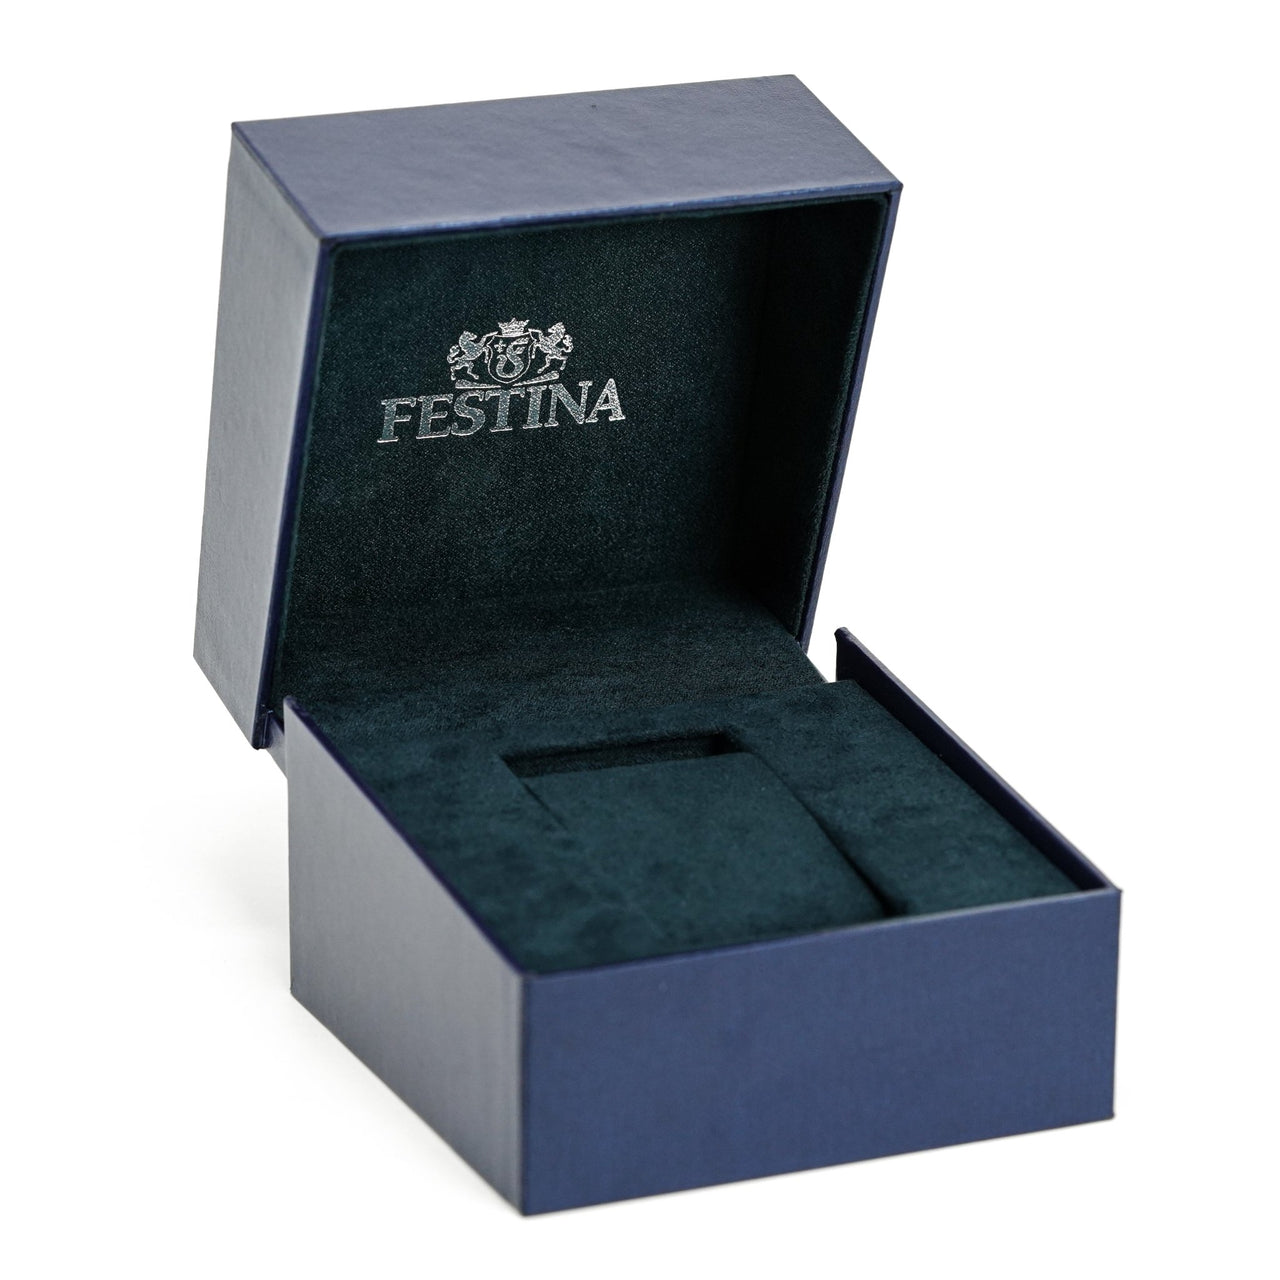 Festina Watch Blue Chrono Stainless Steel F16826-B - Watches & Crystals